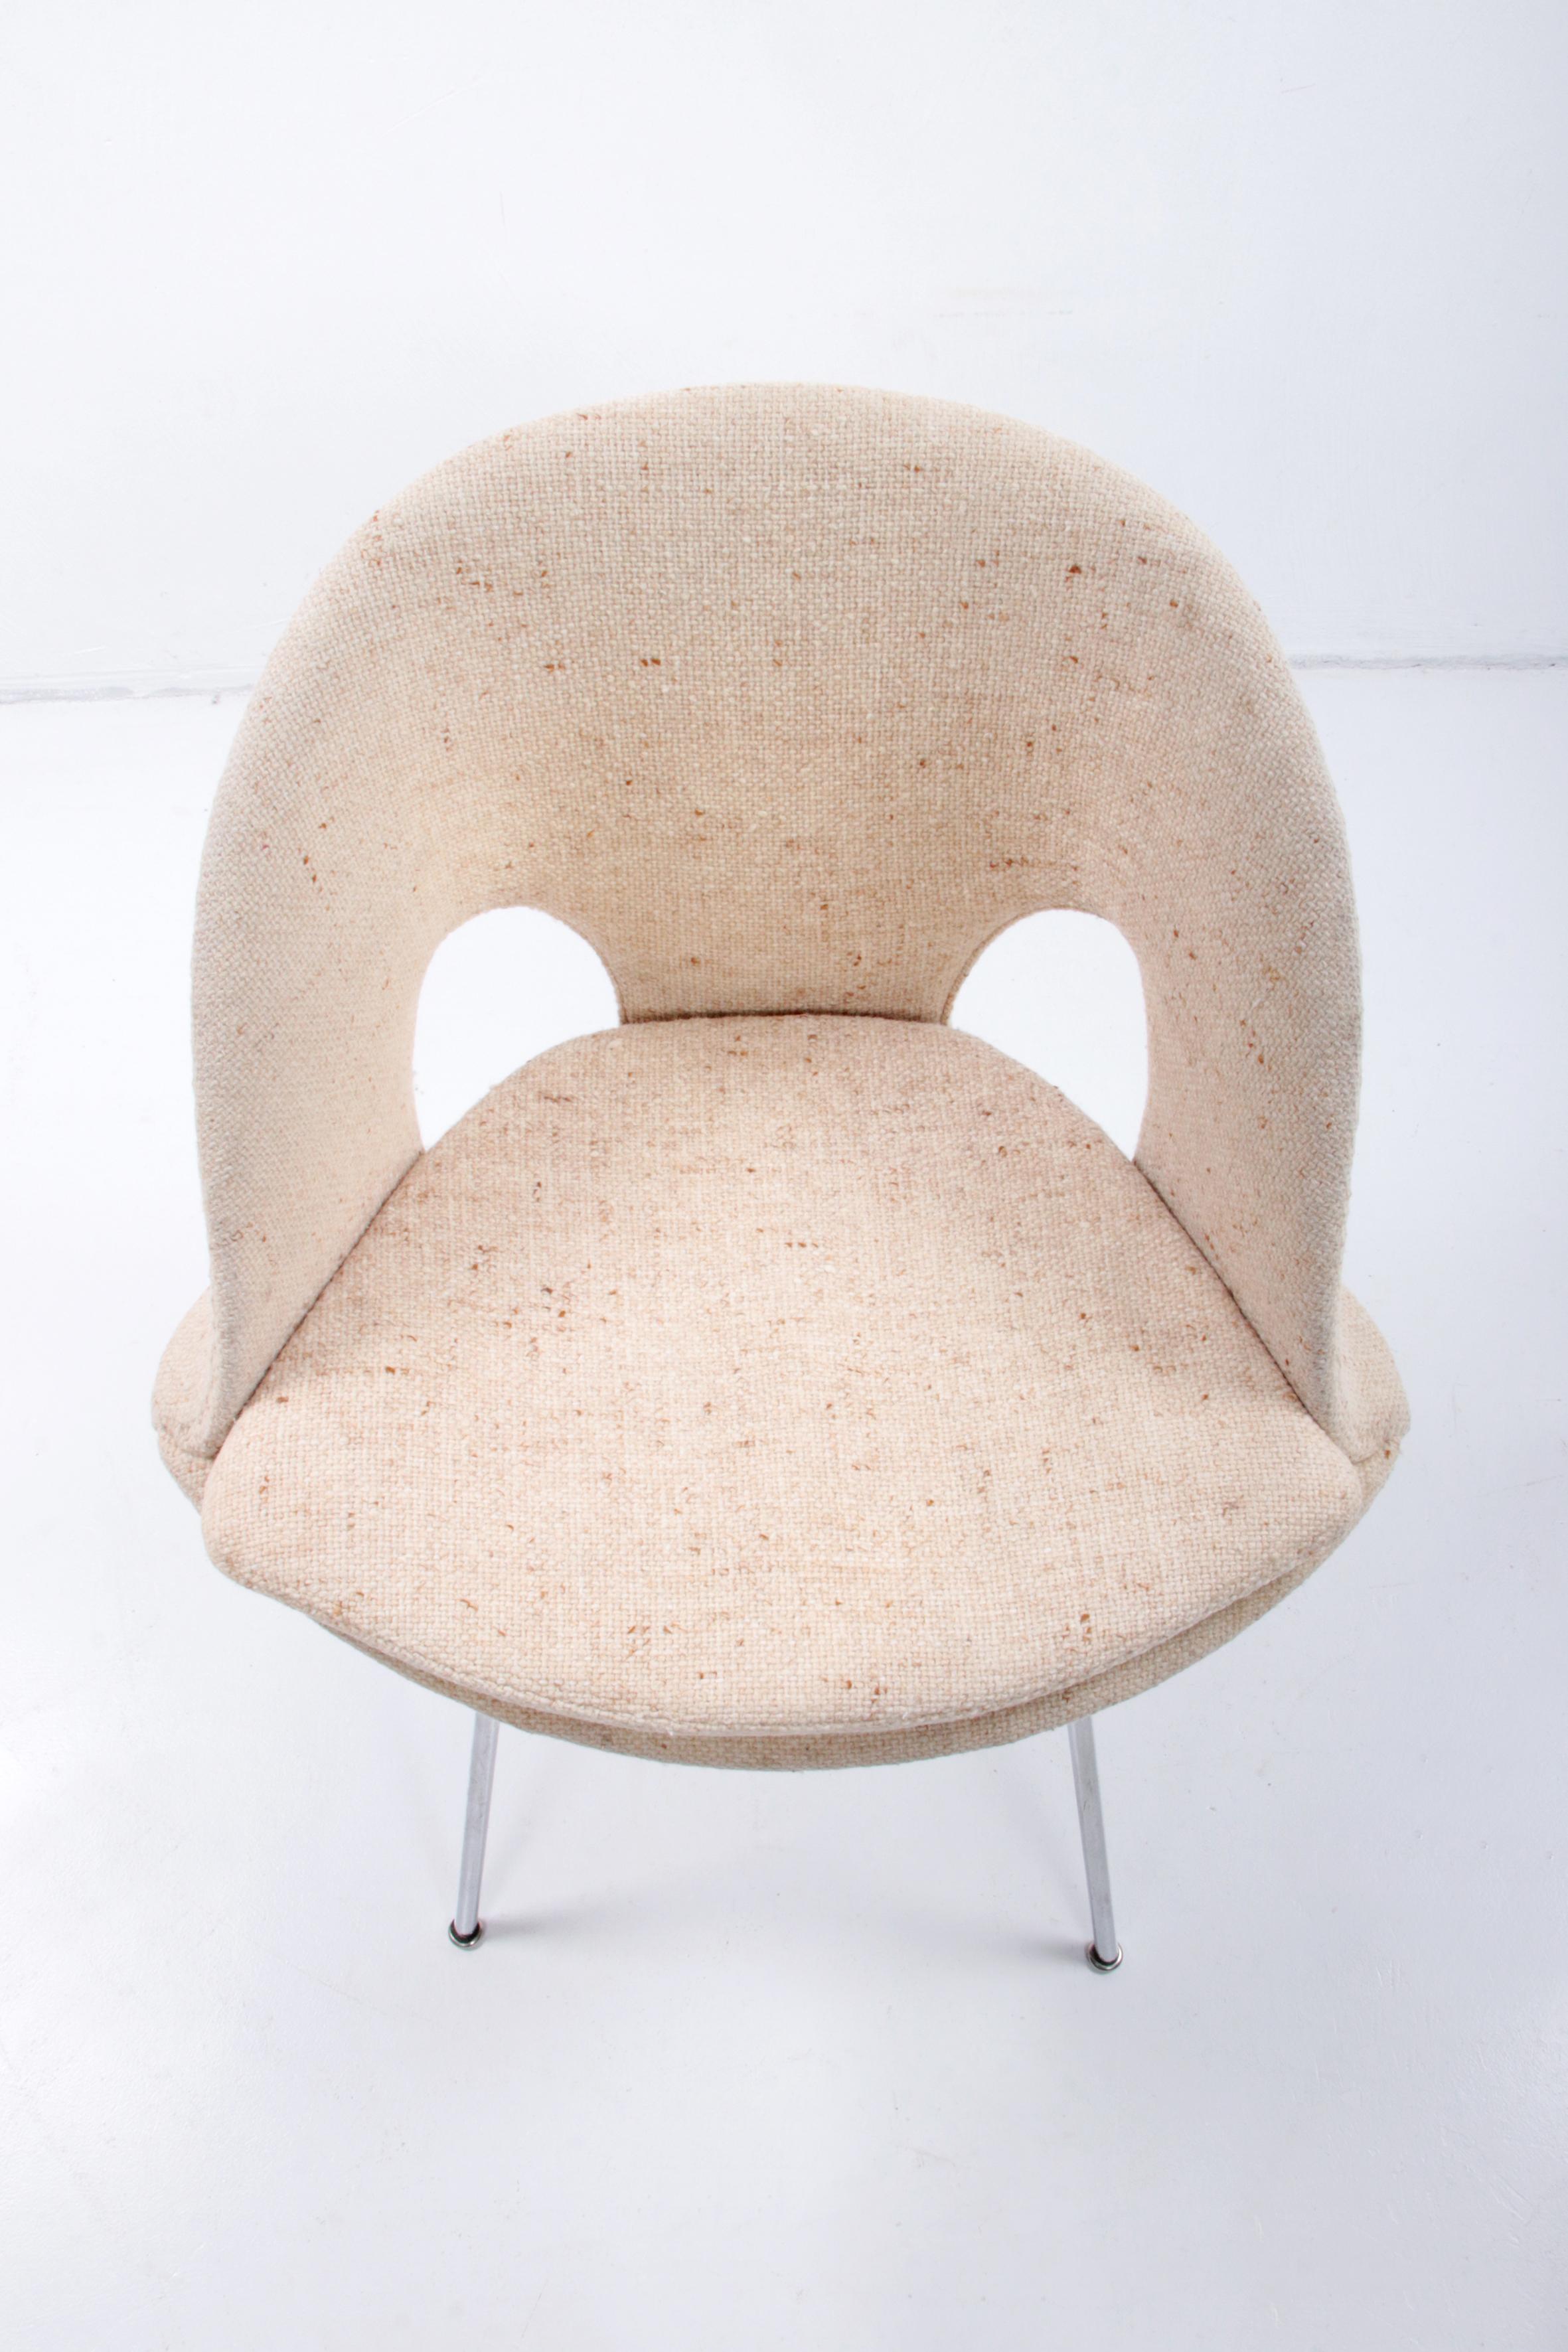 Walter Knoll Lounge Chair by Arno Votteler Model 350, 1950s For Sale 10